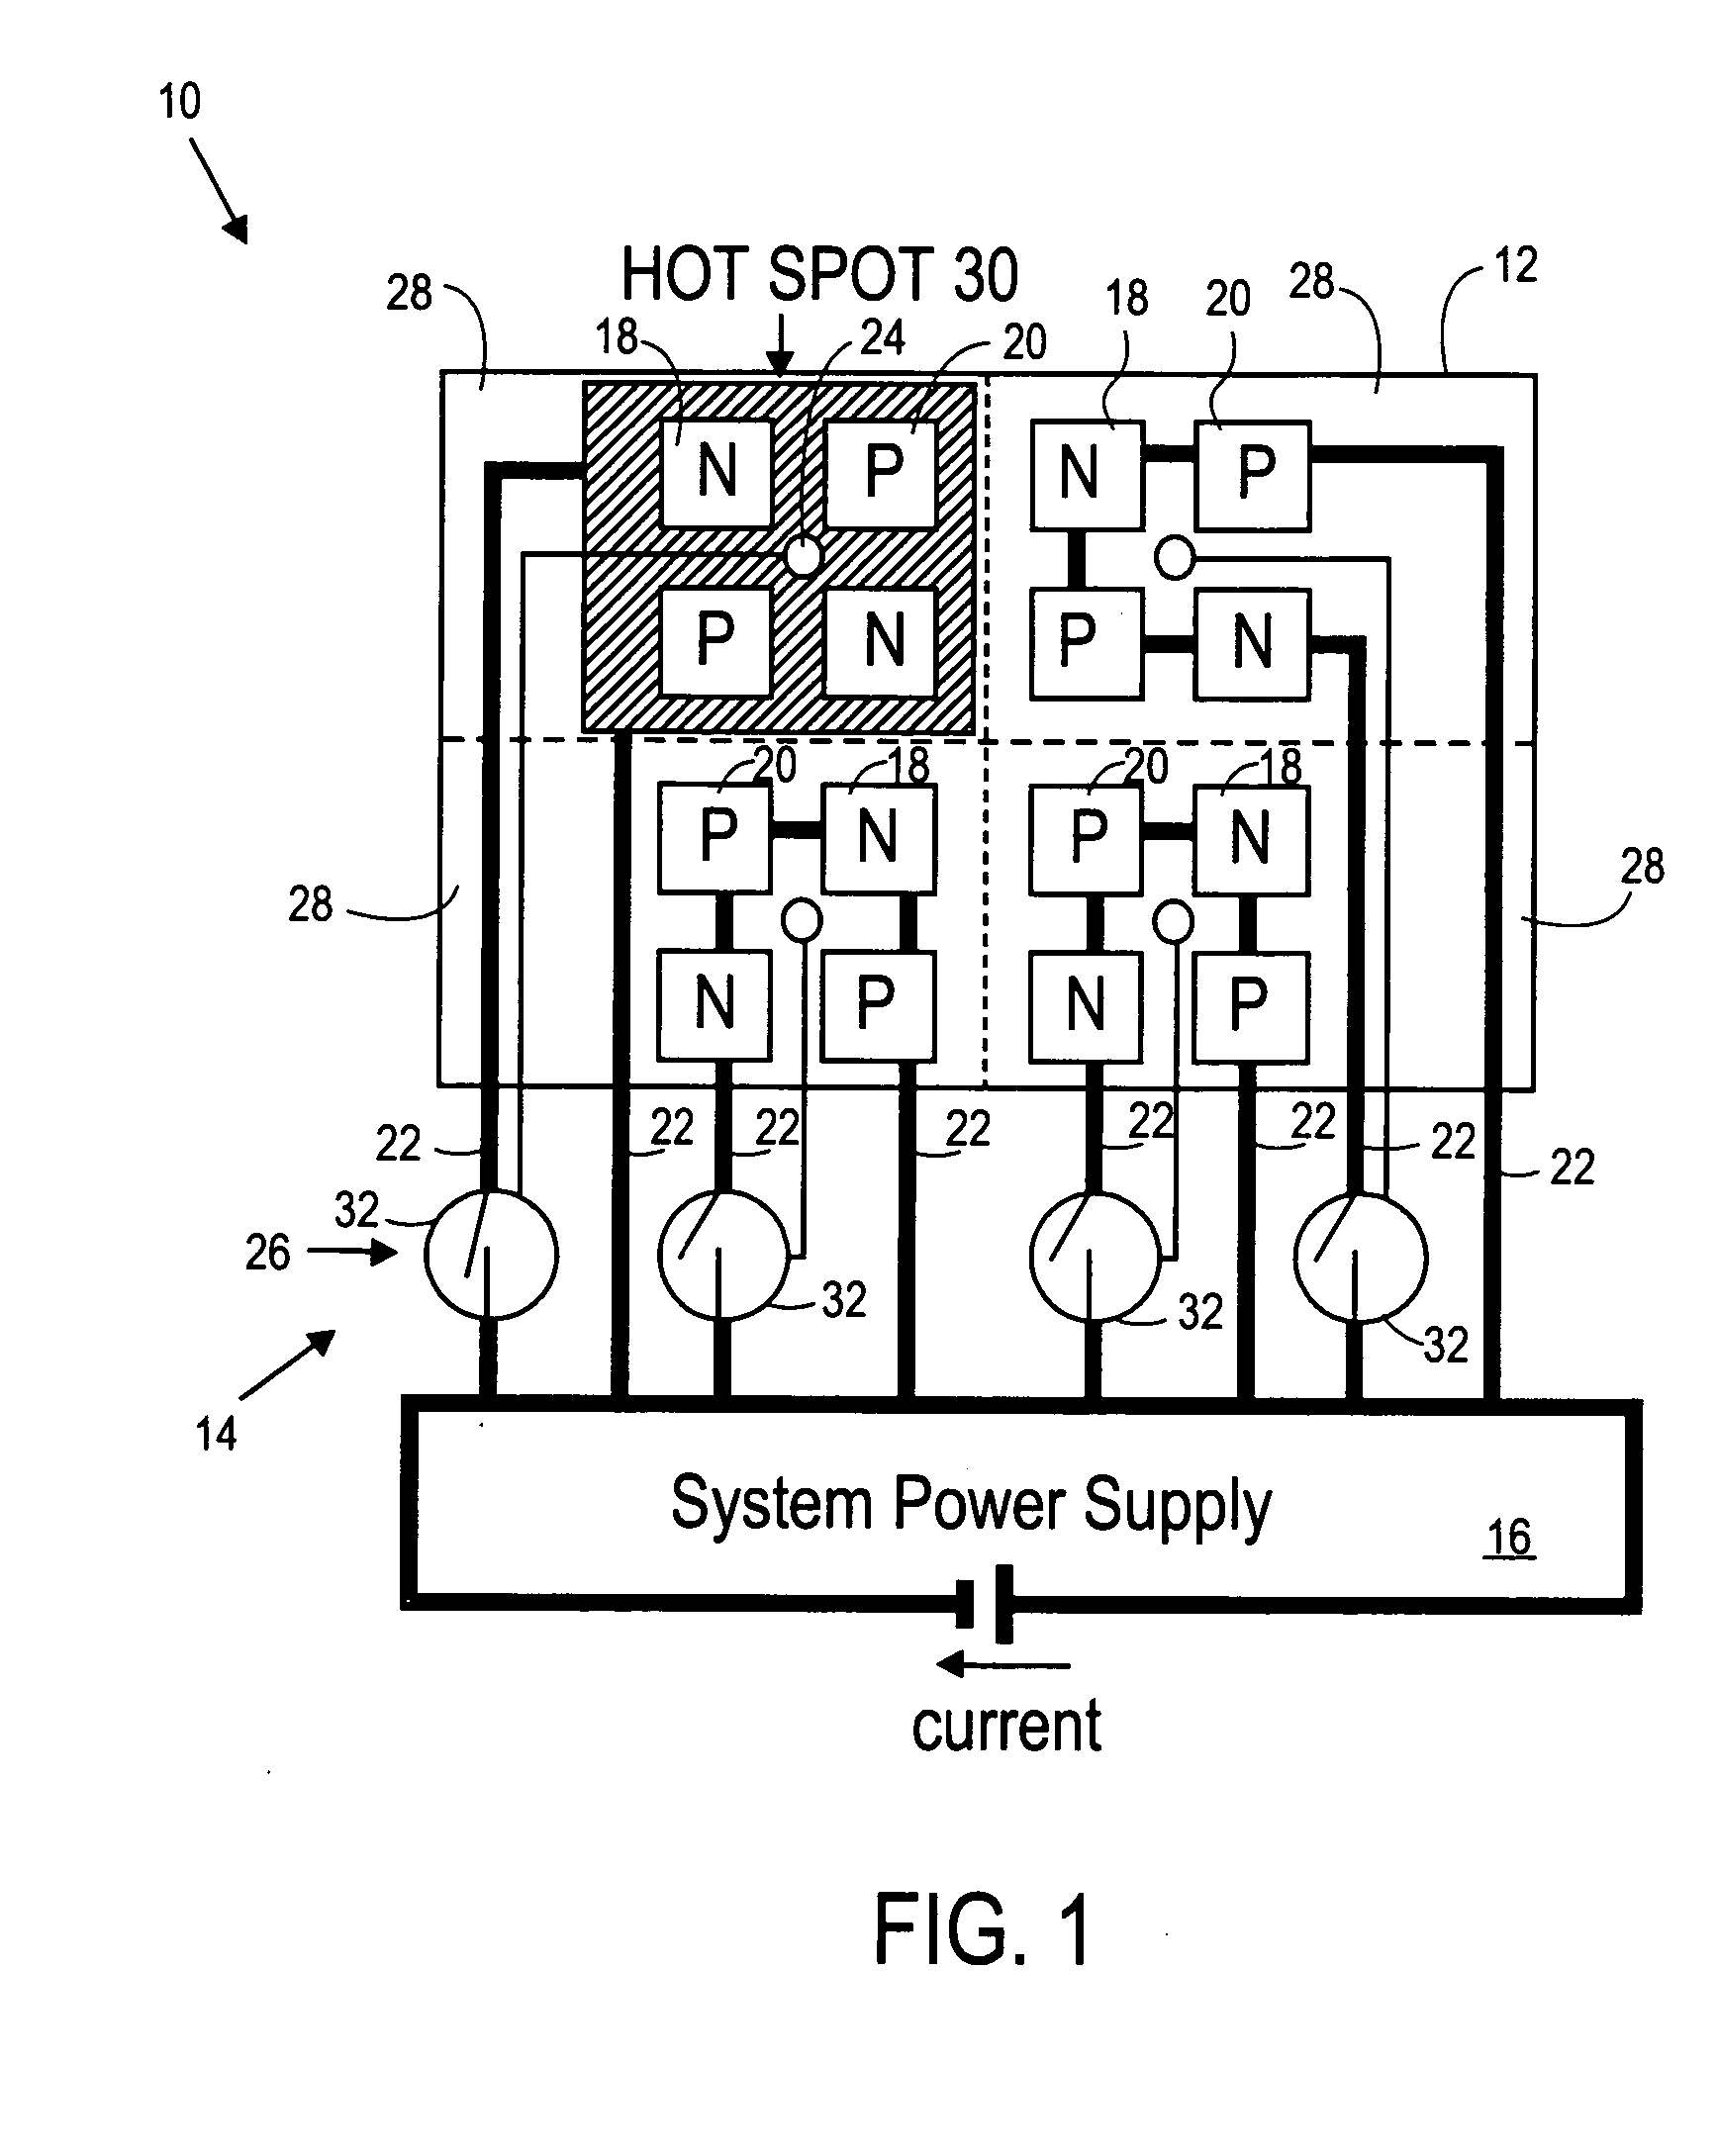 Cooling system for an electronic component